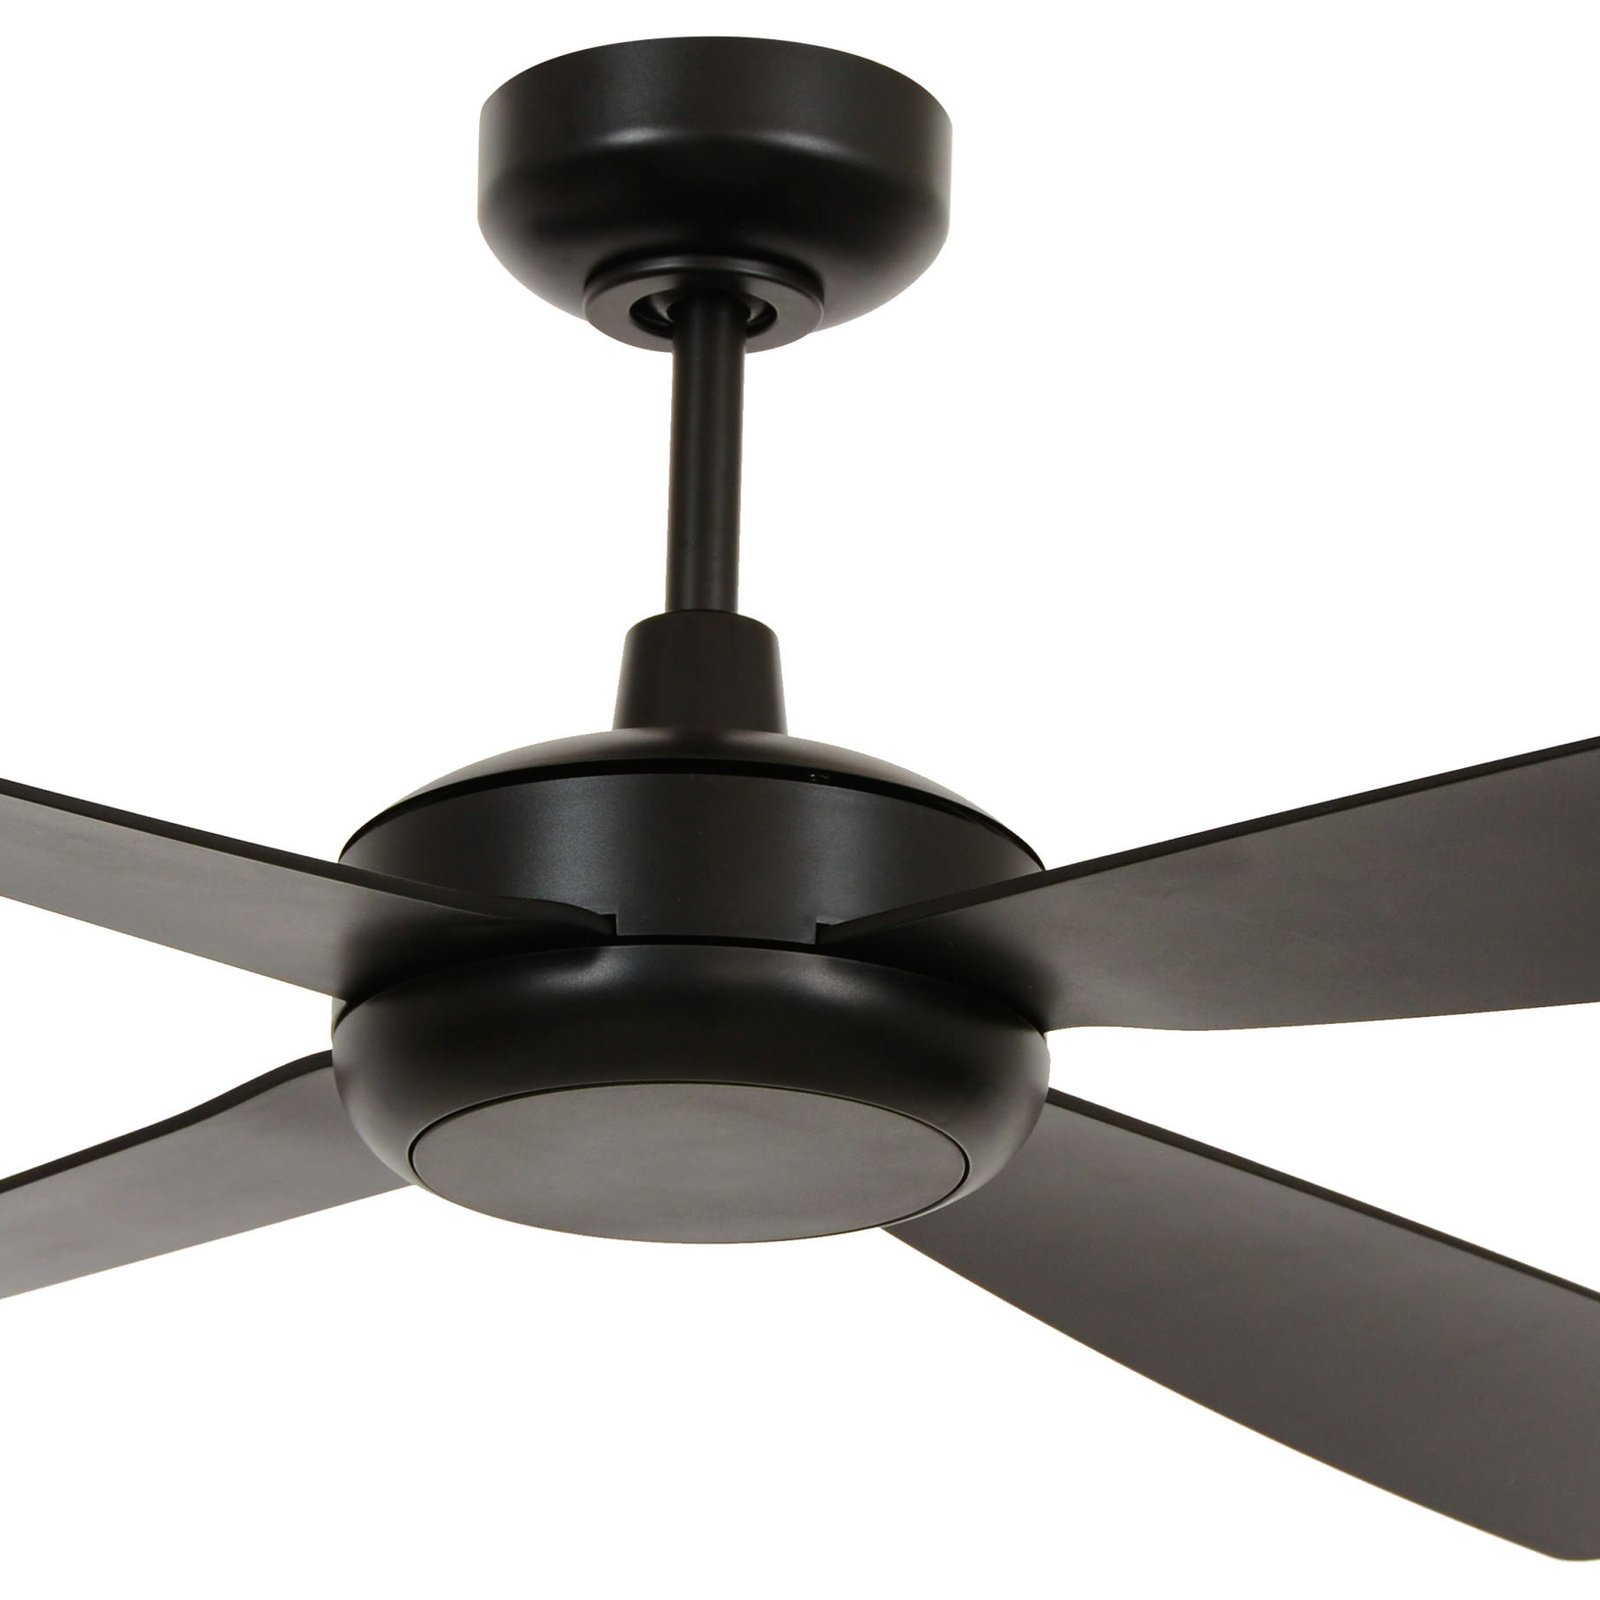 Beacon ceiling fan with light Slipstream, black, quiet